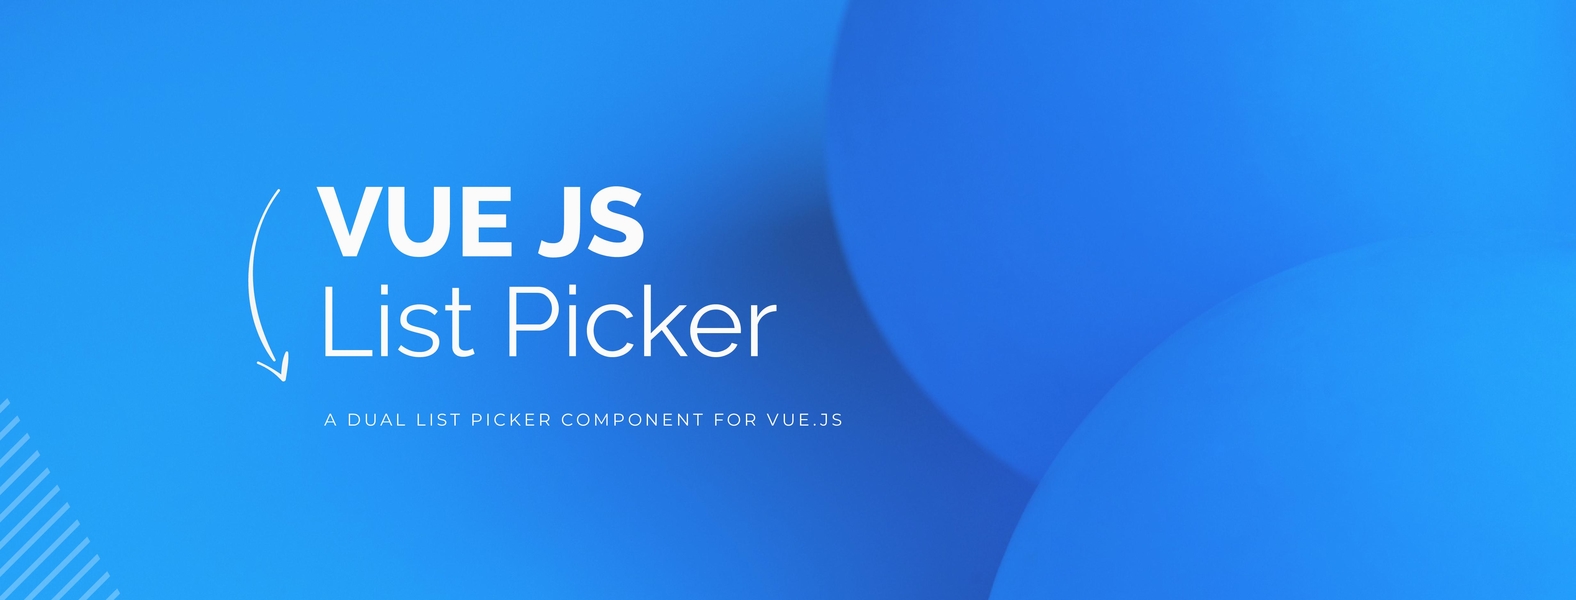 A List Picker Component  made with Vue Js cover image